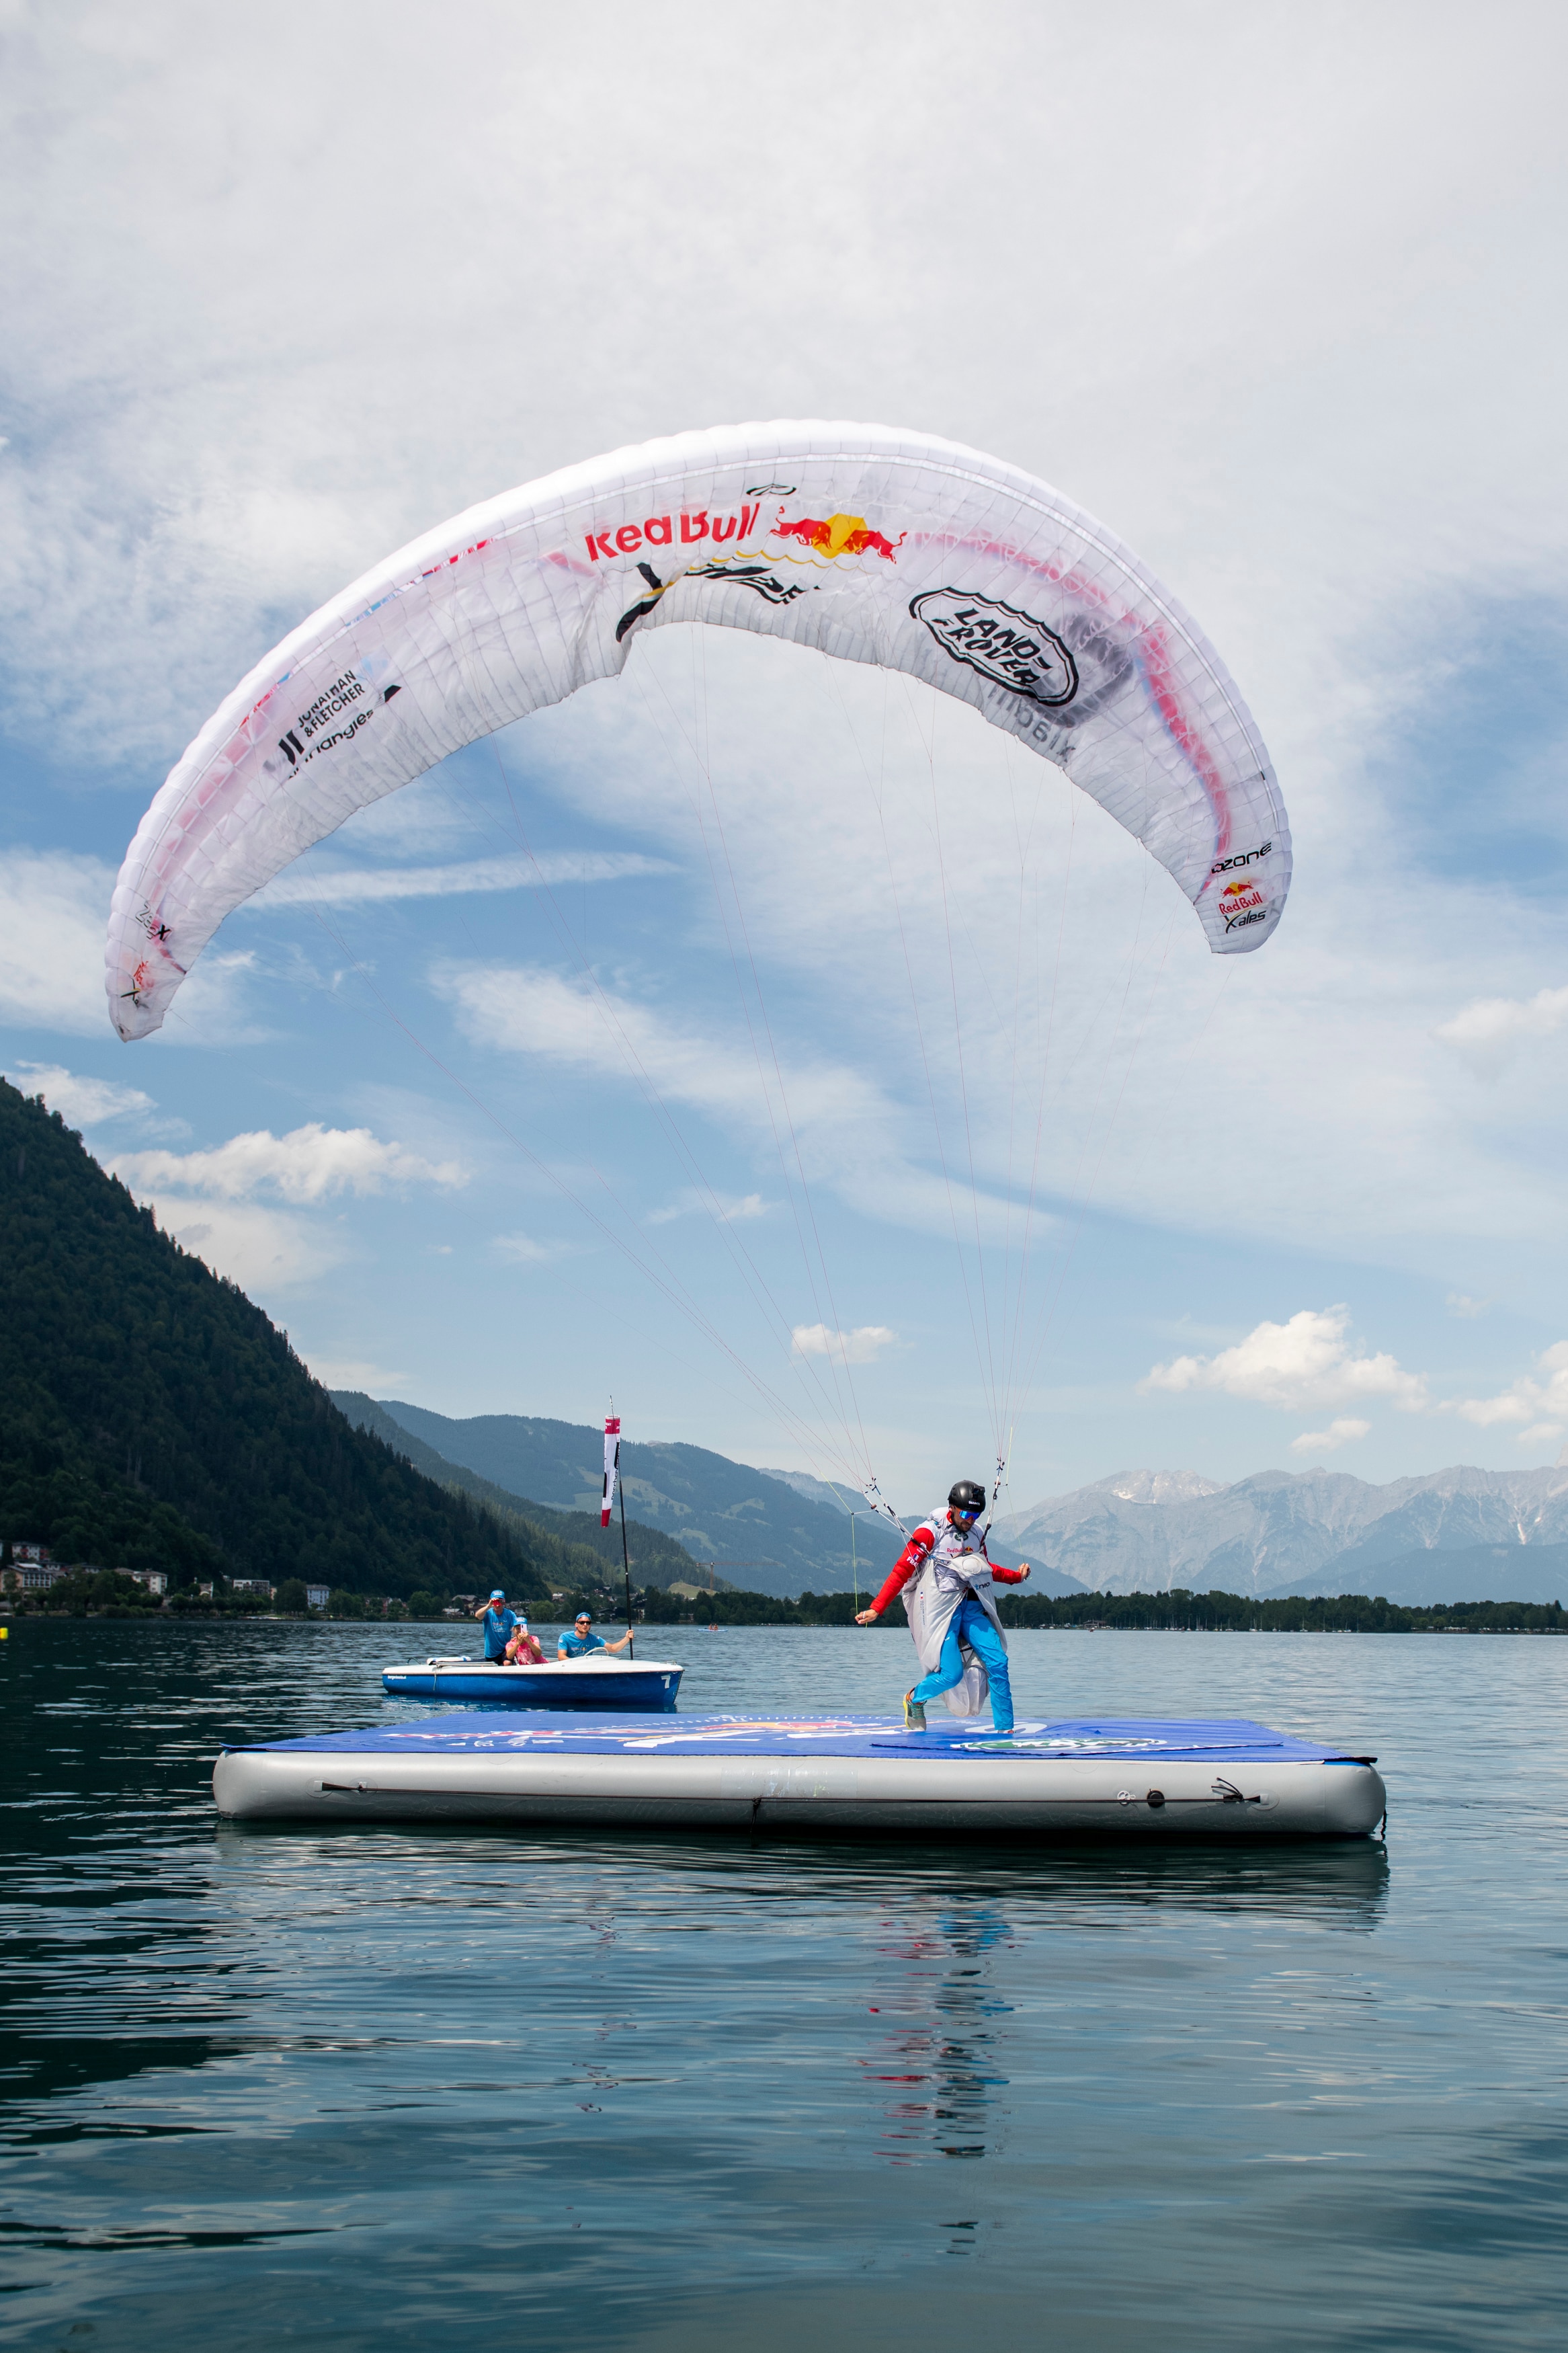 FRA1 celebrates in the Red Bull X-Alps finish in Zell am See, Austria on June 29, 2021.